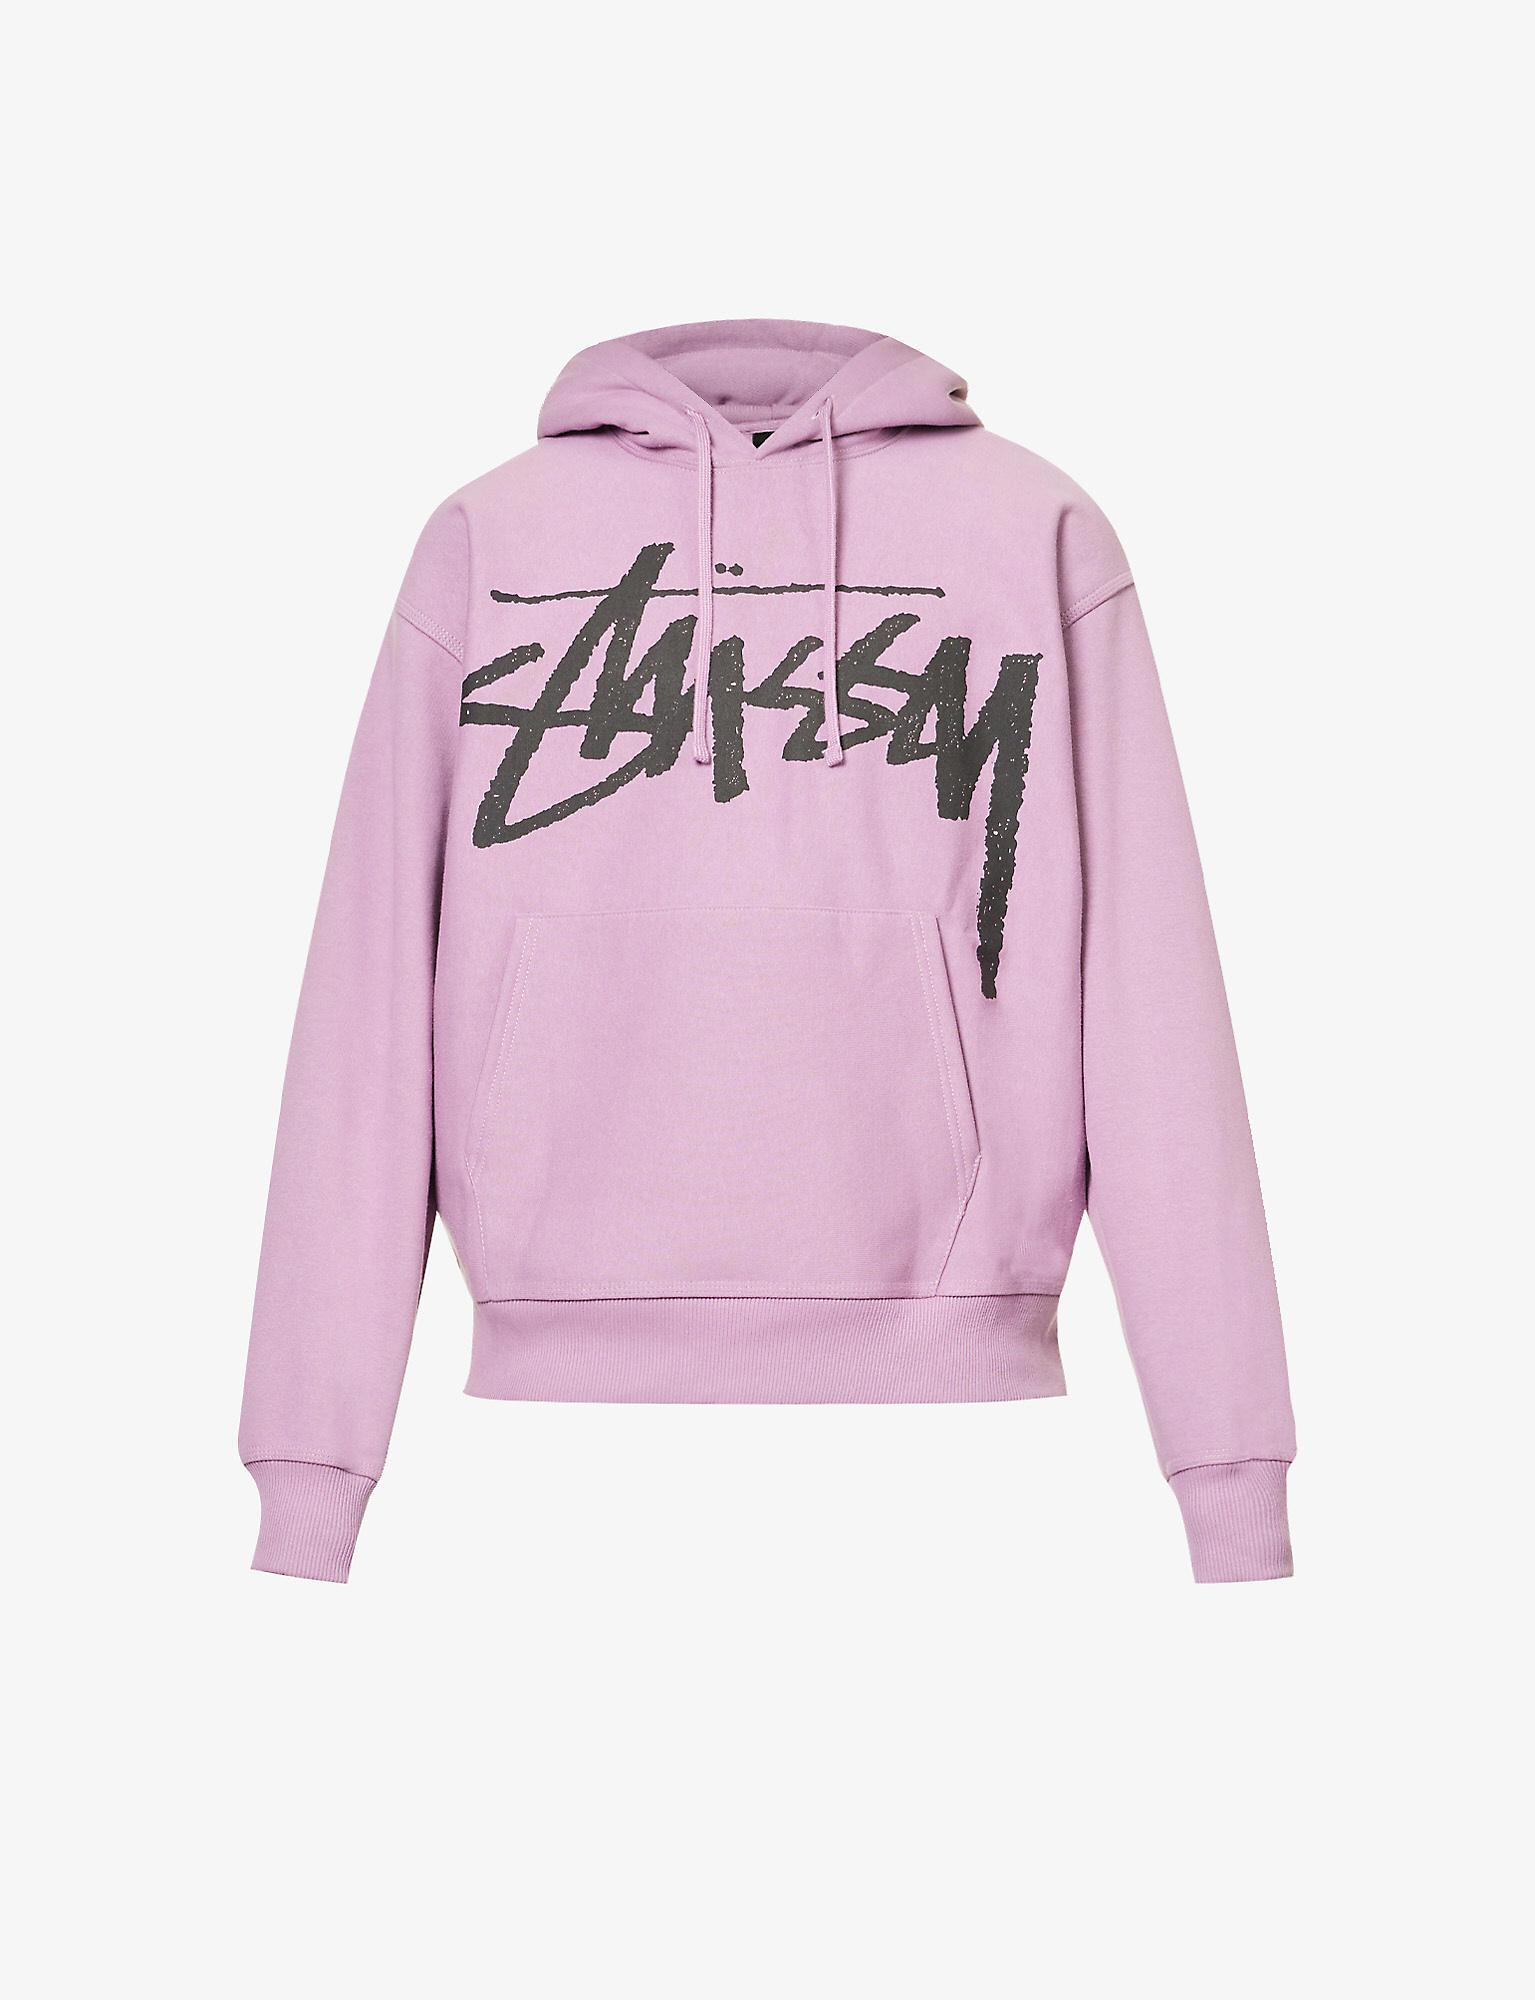 Stussy Big Stock Logo-print Cotton-blend Hoody in Pink for Men | Lyst Canada